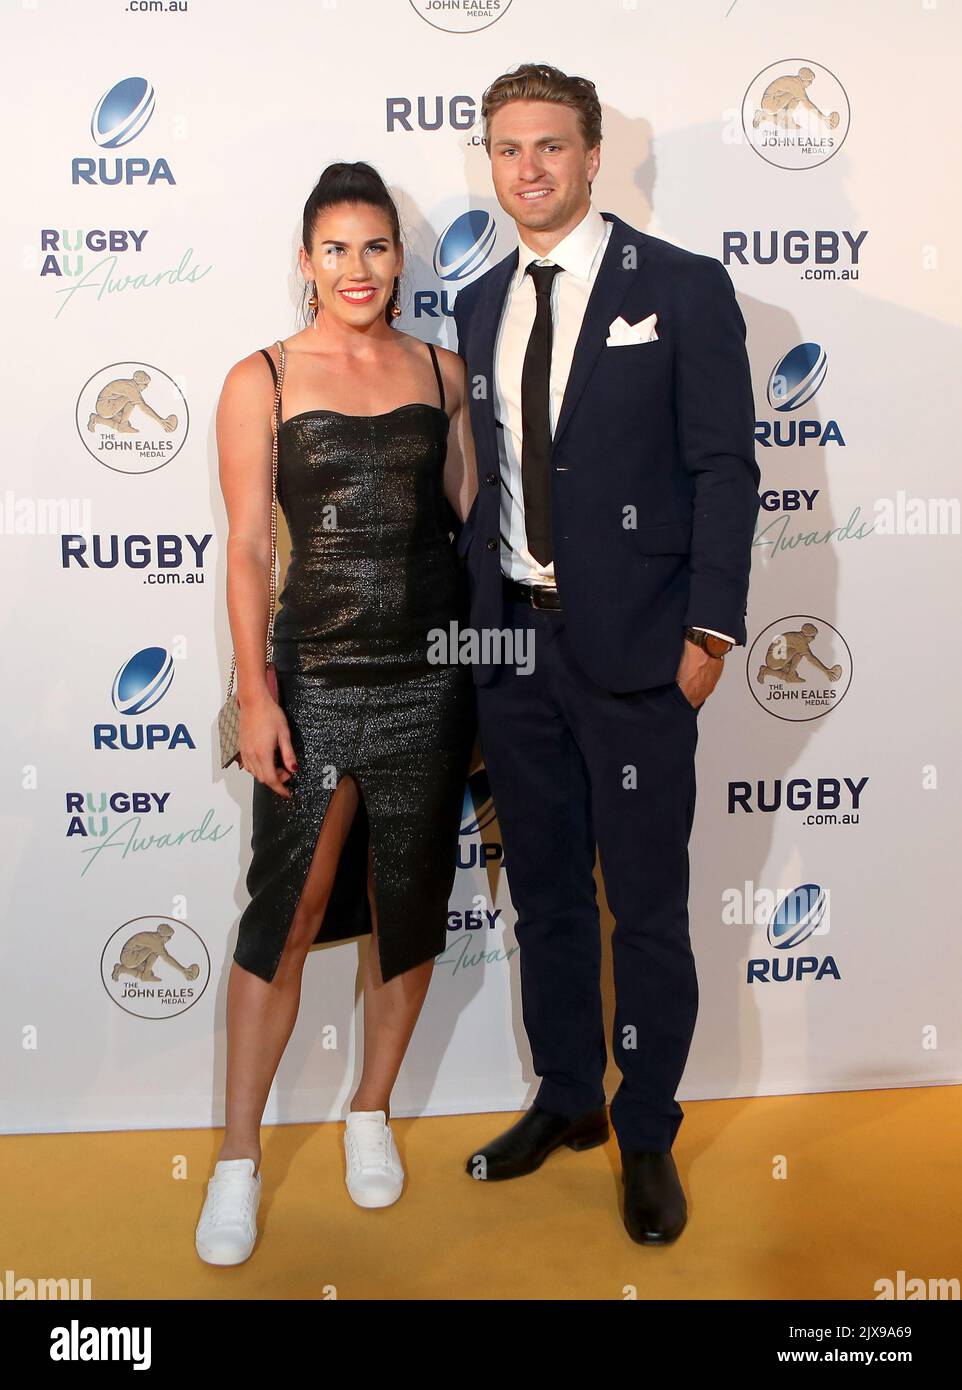 Rugby Sevens player Charlotte Caslick and her partner Lewis